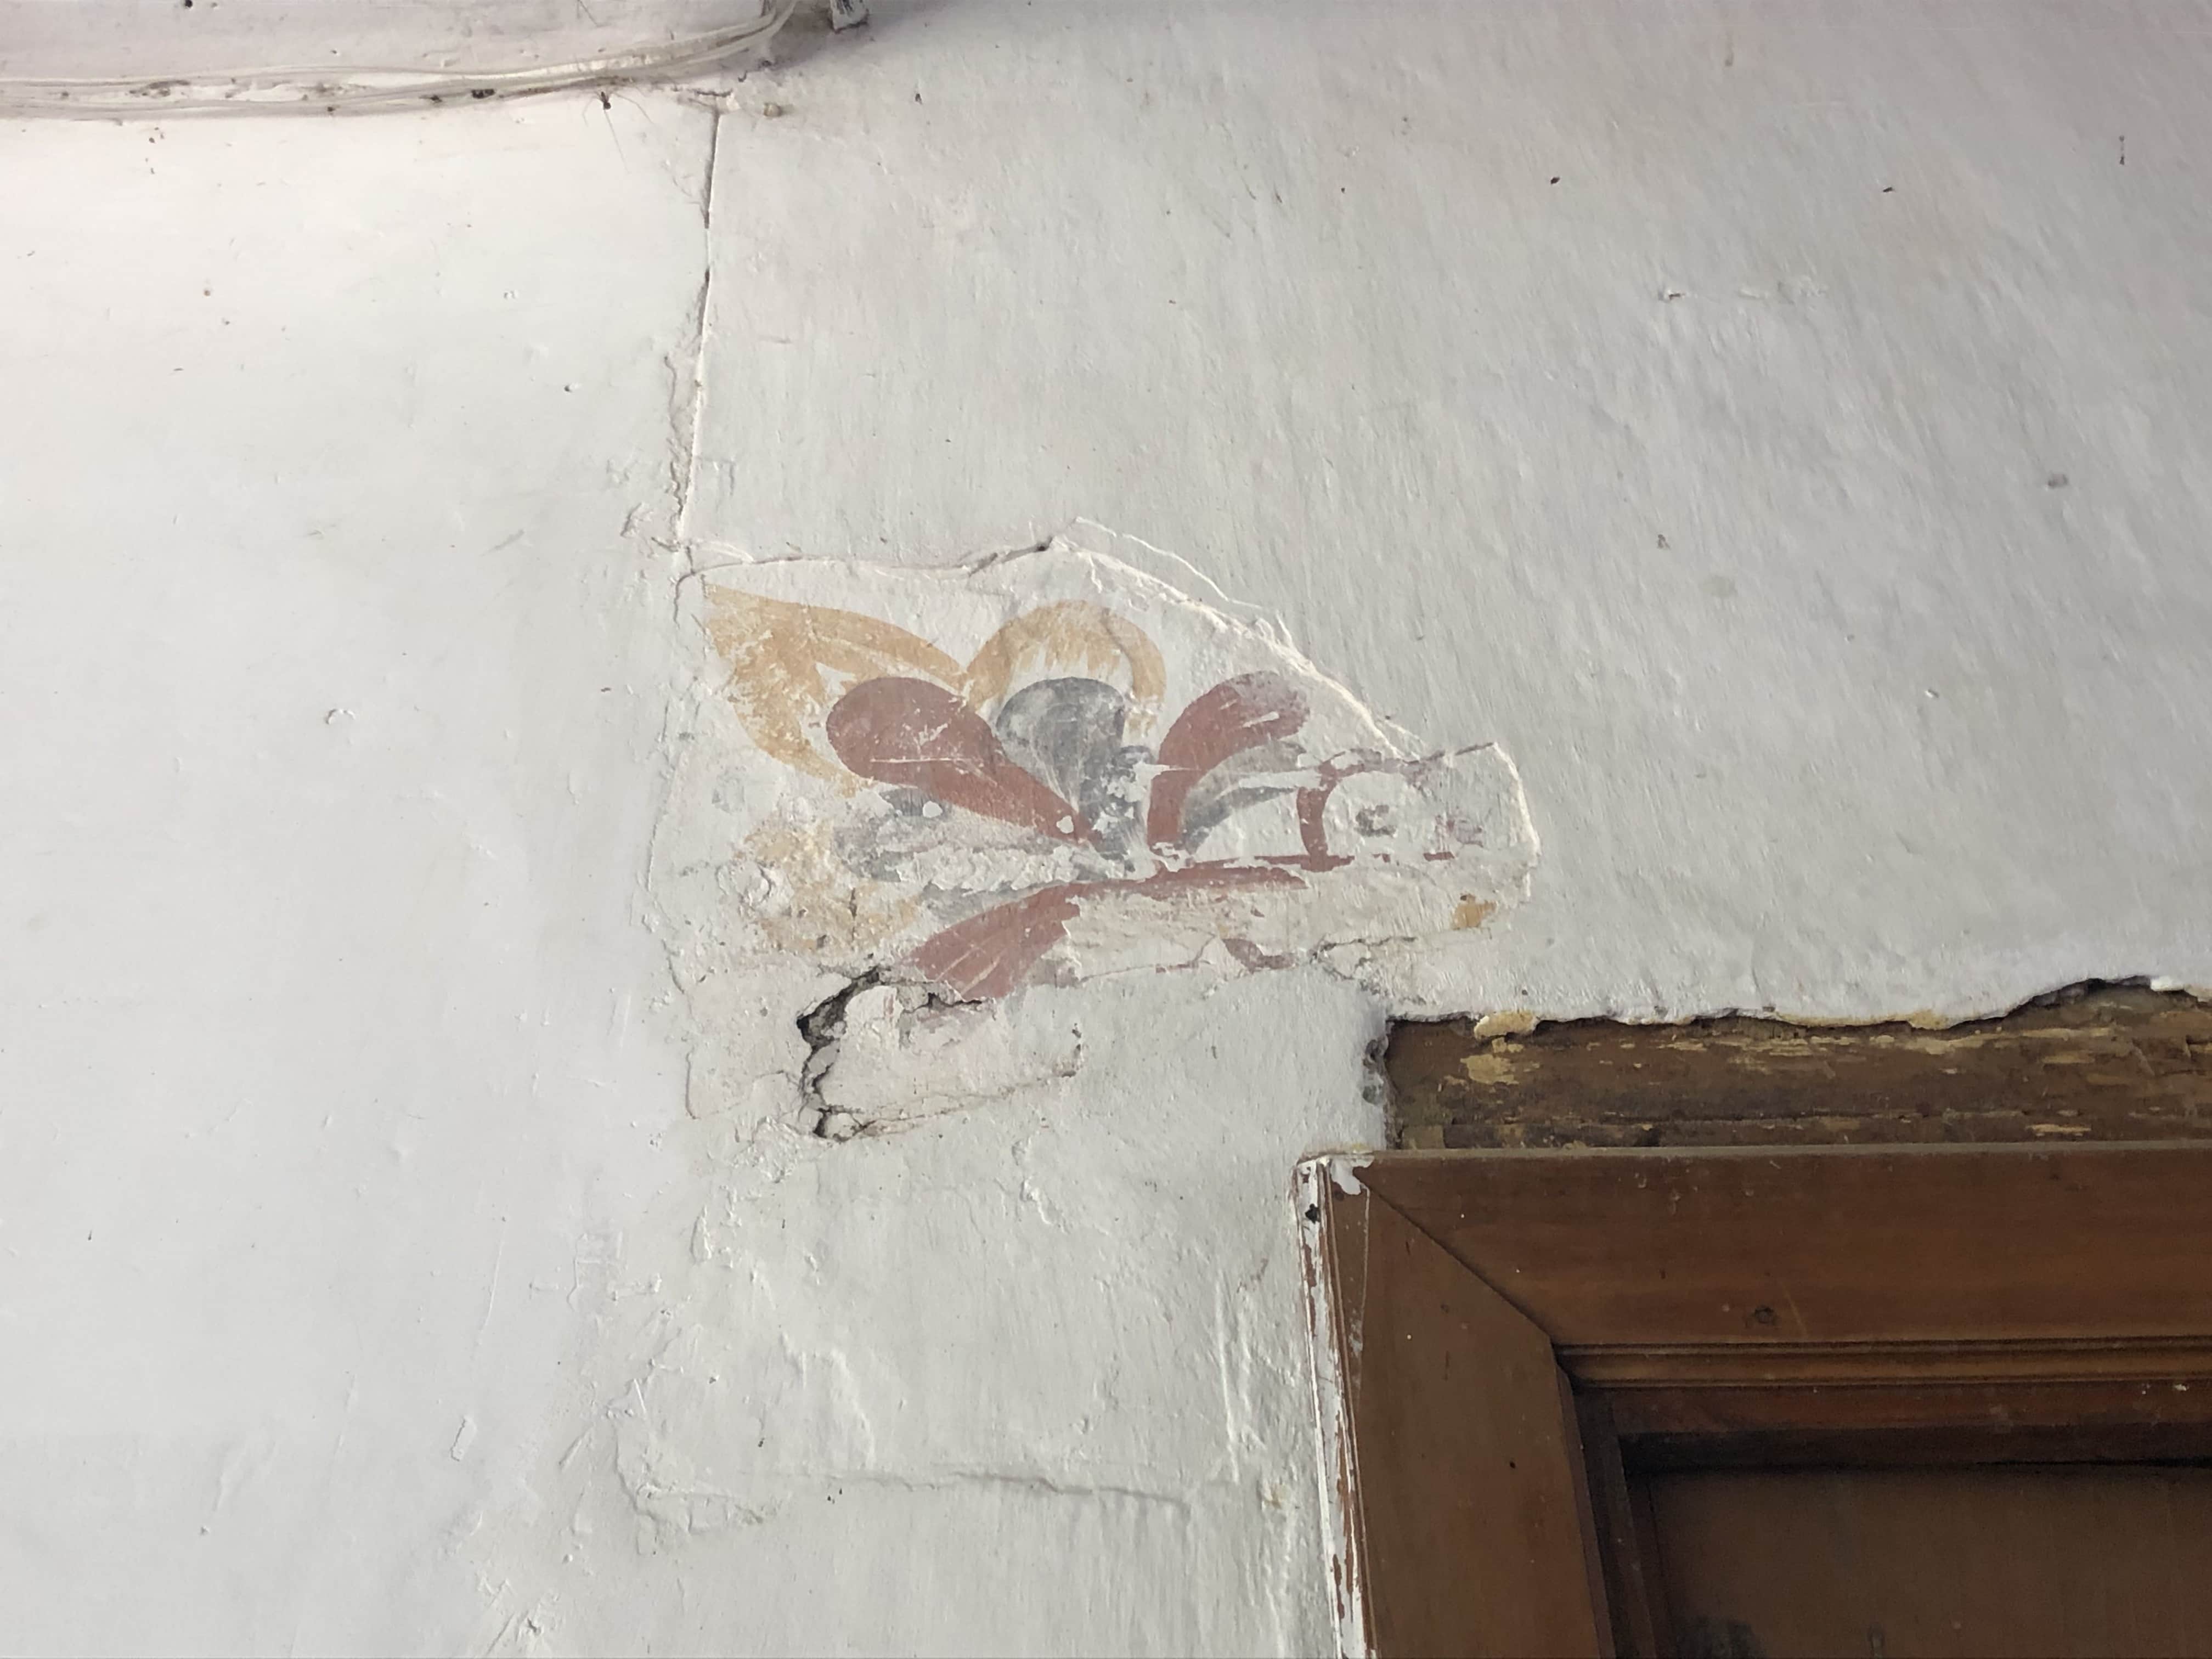 Fresco in the Cultural Center of Mompox, Bolívar, Colombia